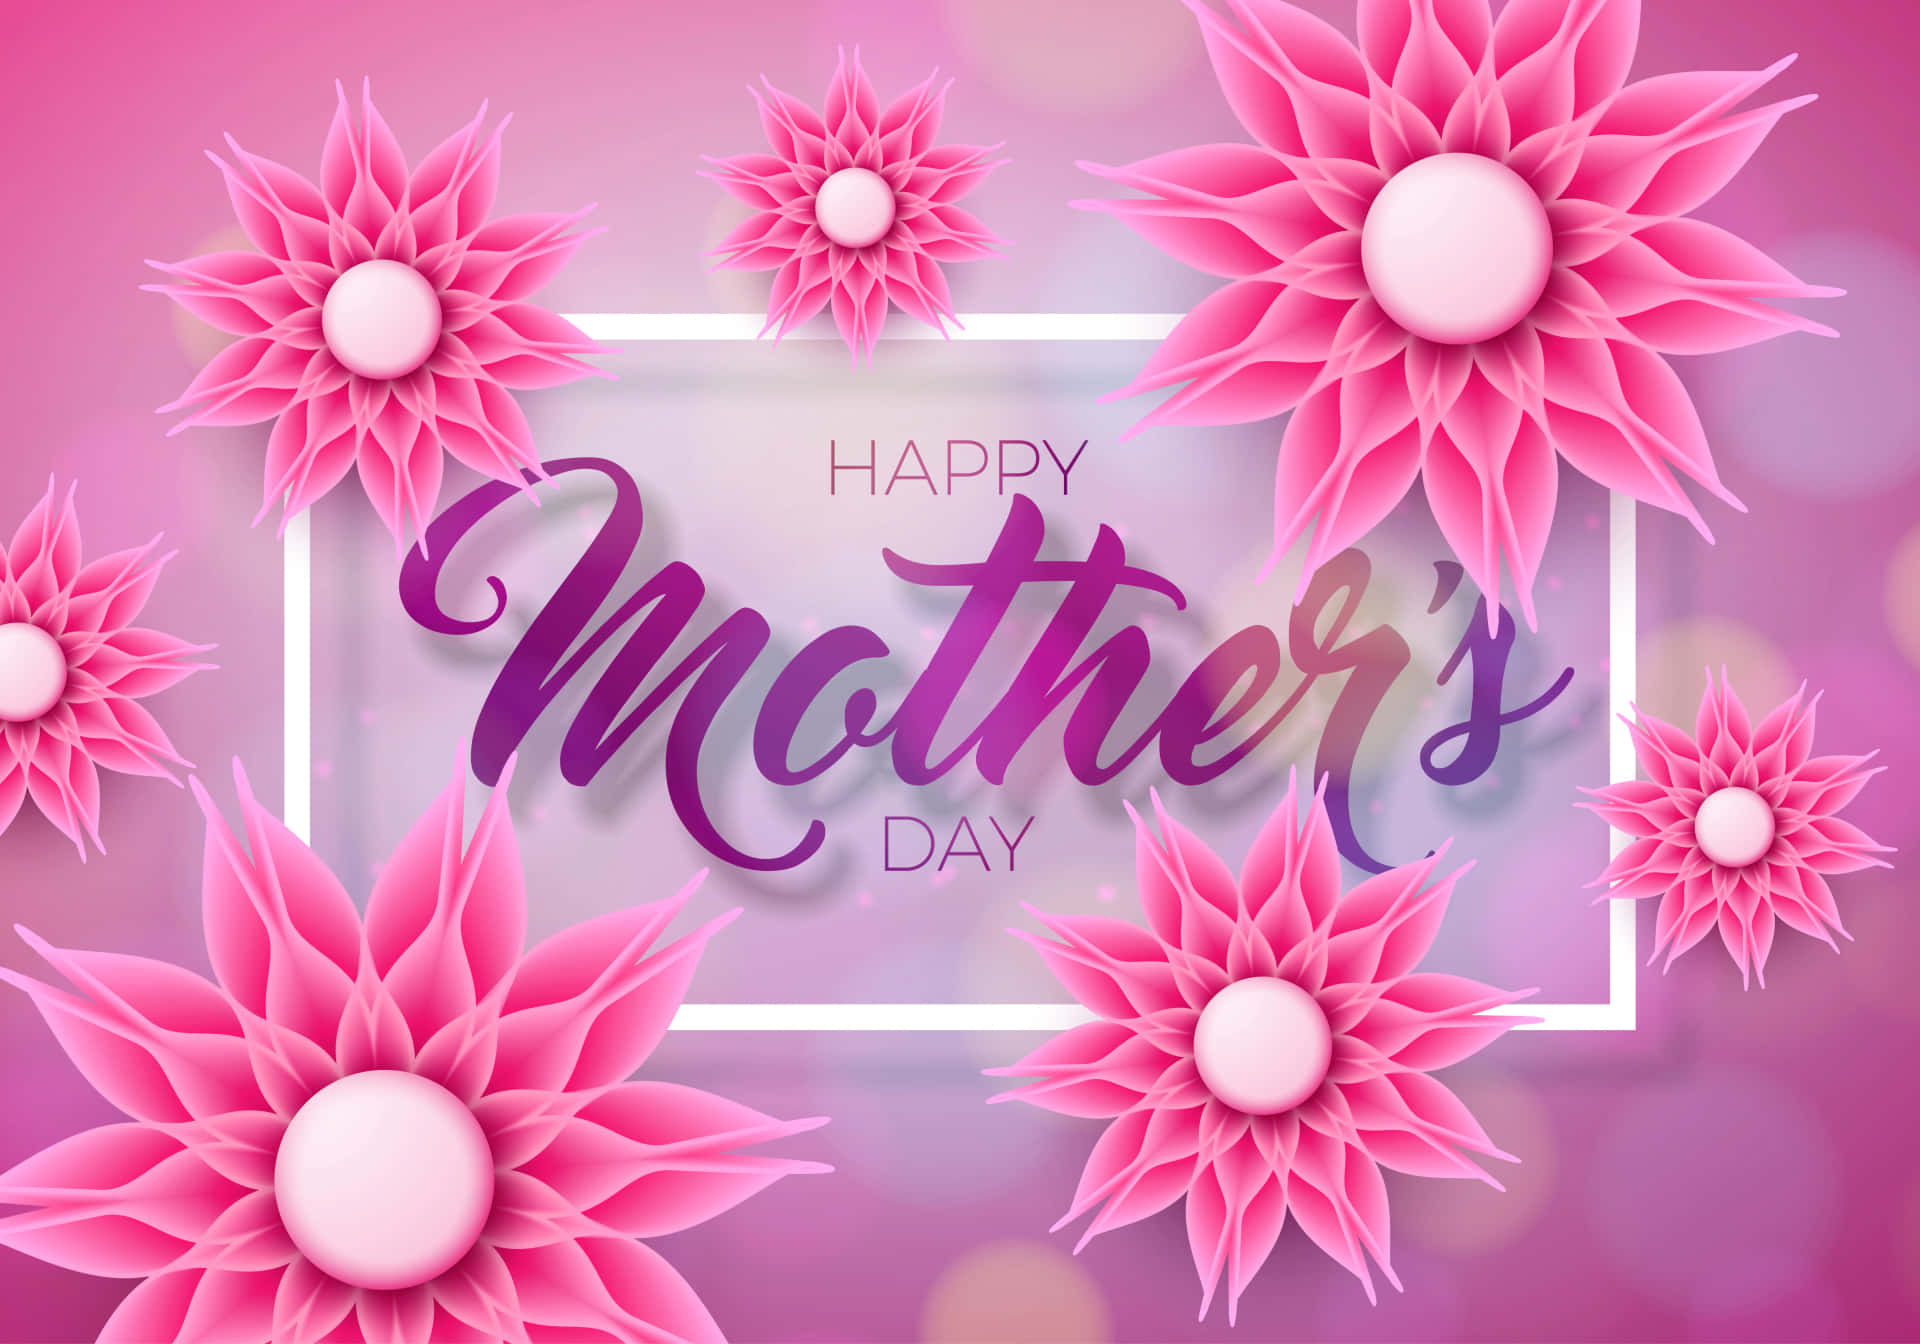 "A mother's love is limitless, share your appreciation with a special card or gift this Mother's Day."